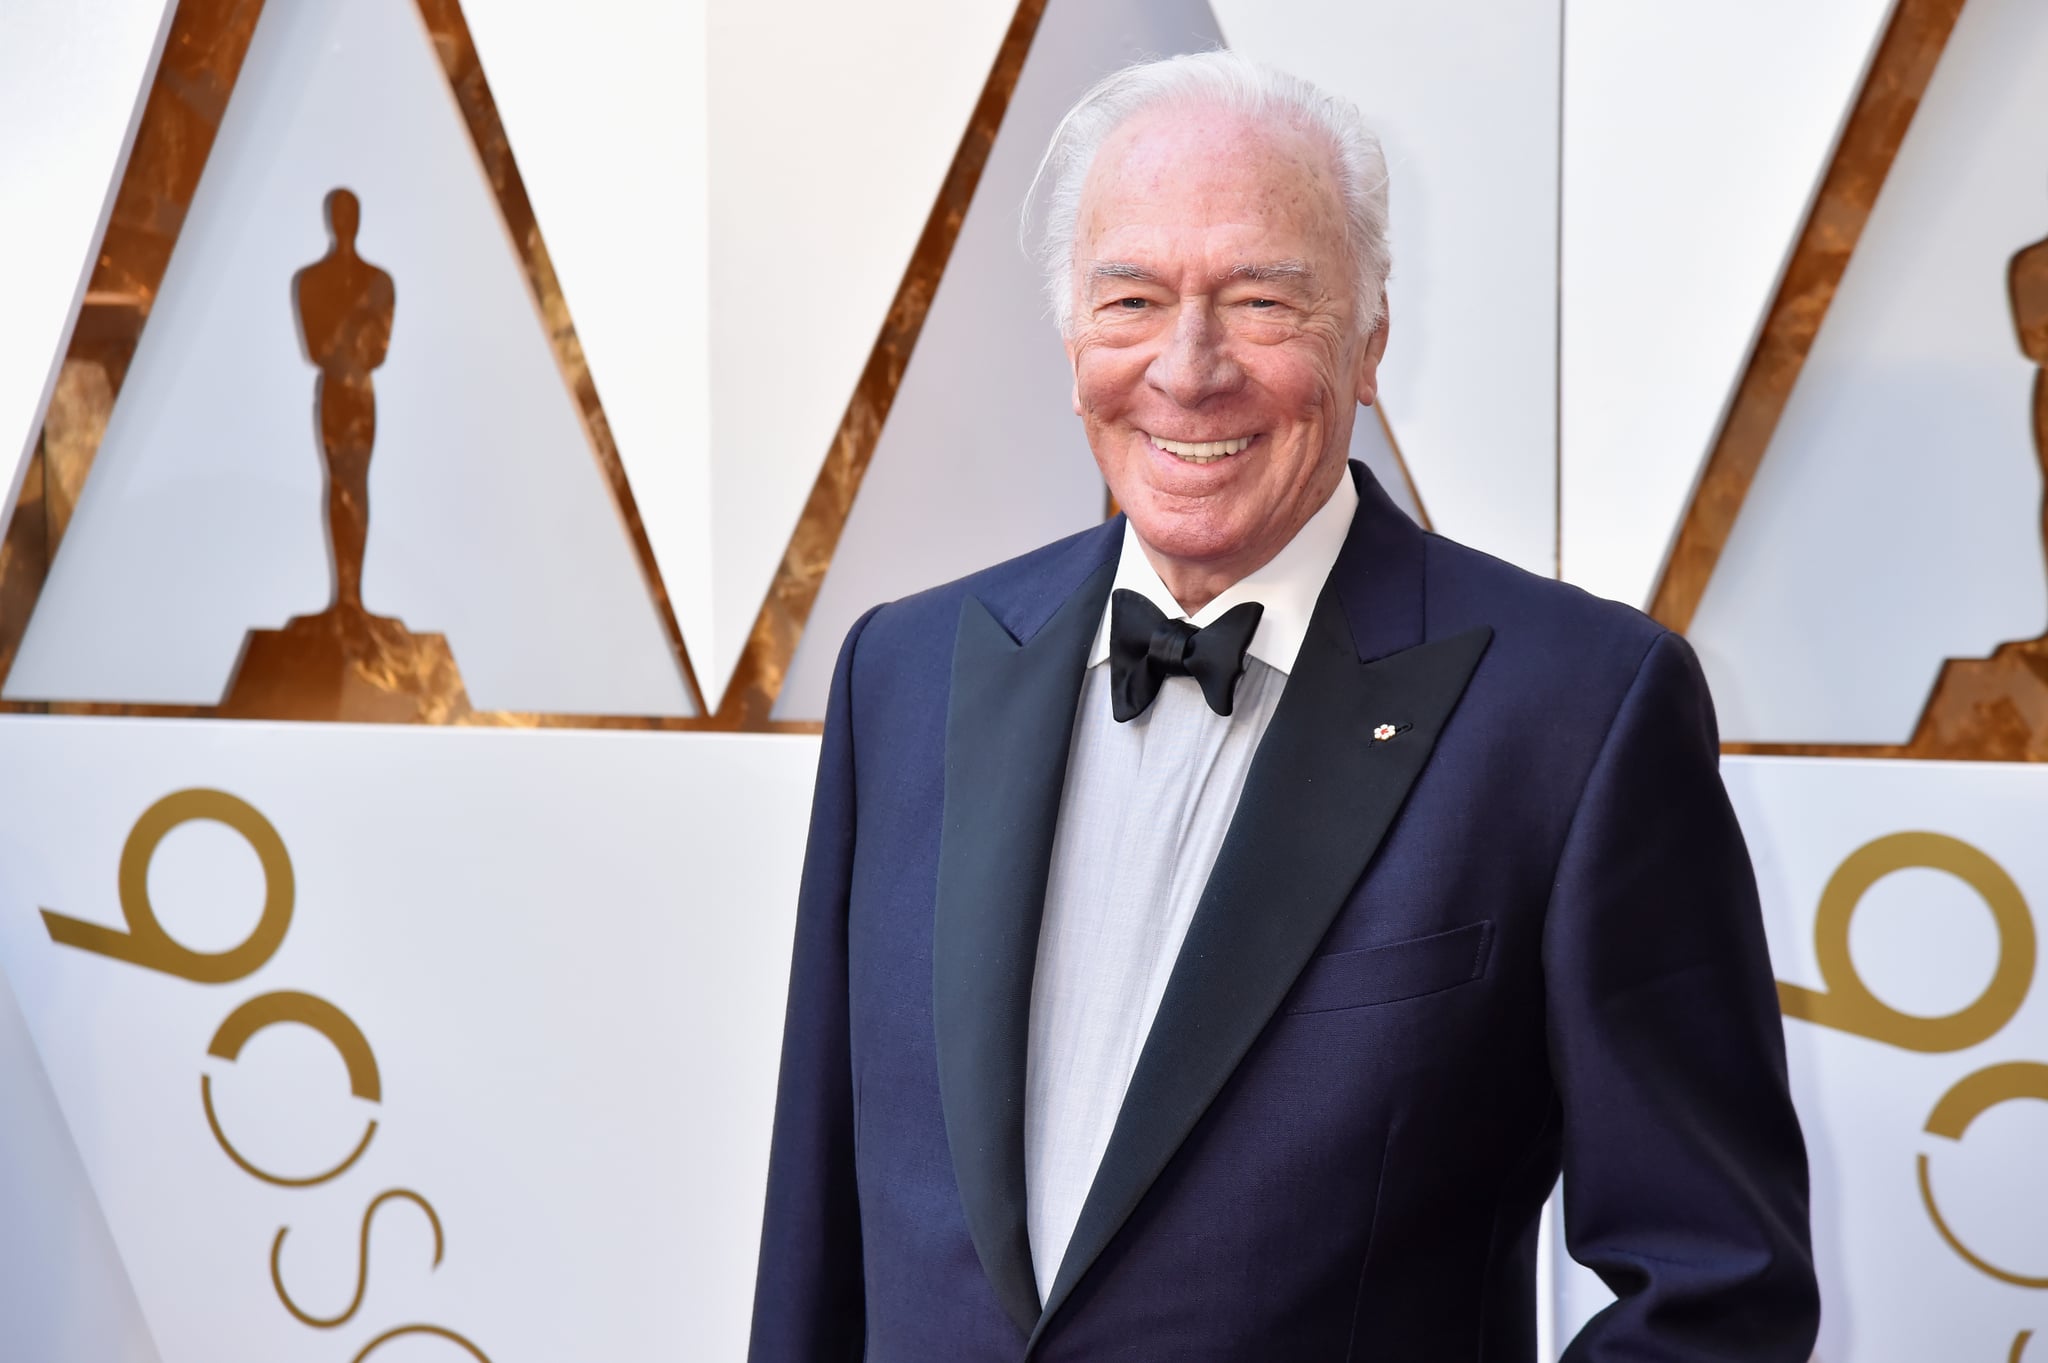 HOLLYWOOD, CA - MARCH 04:  Christopher Plummer attends the 90th Annual Academy Awards at Hollywood & Highland Center on March 4, 2018 in Hollywood, California.  (Photo by Jeff Kravitz/FilmMagic)